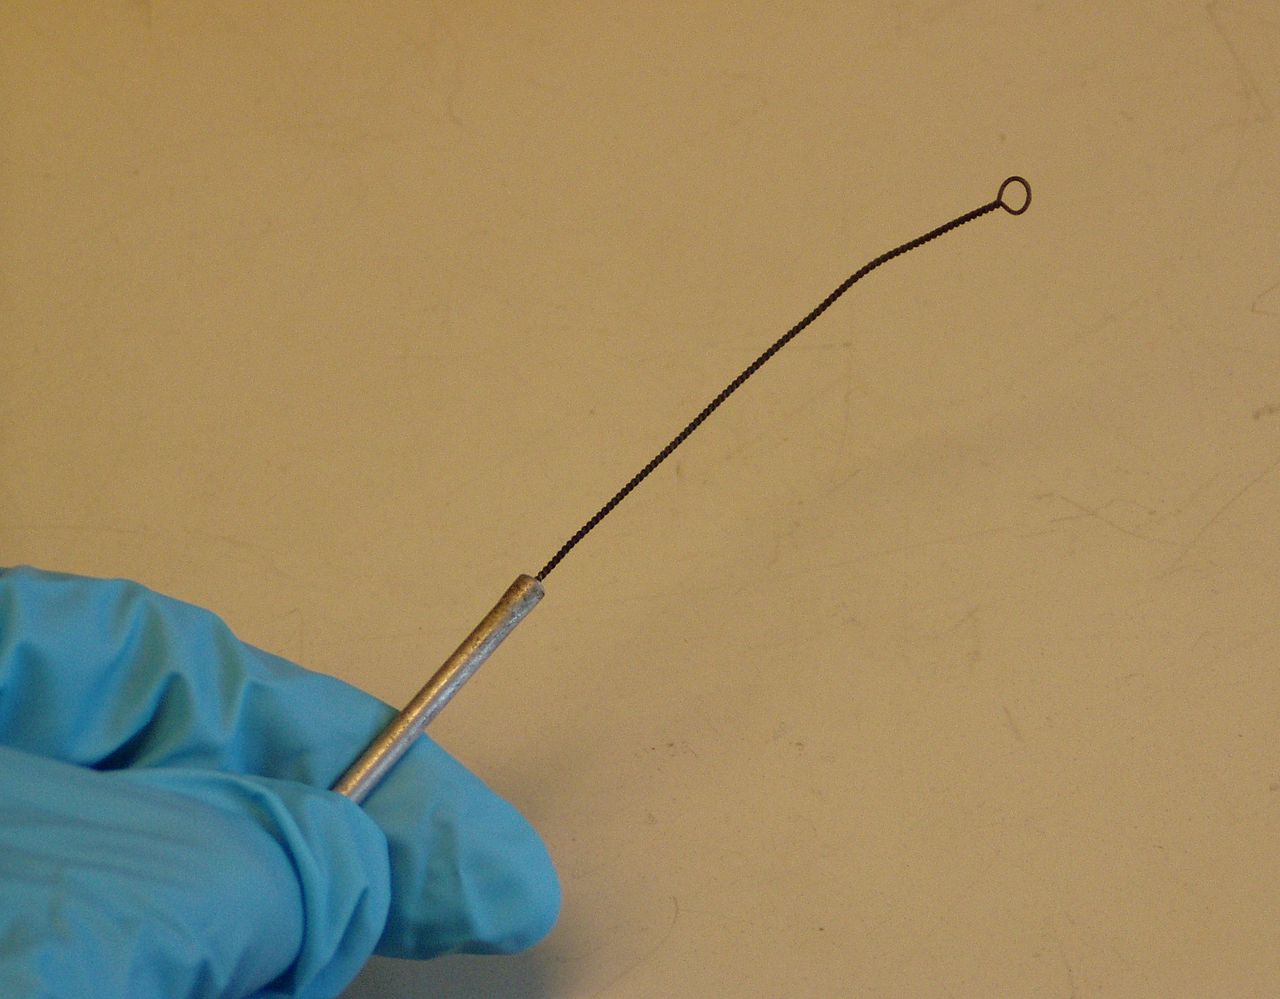 Photograph of an inoculation loop being held between someone's fingers. The person is wearing a plastic glove. The inoculation loop is metal. It has a thick handle and then a thinner piece of metal coming out of the handle. At the end of this piece of metal there is a loop.